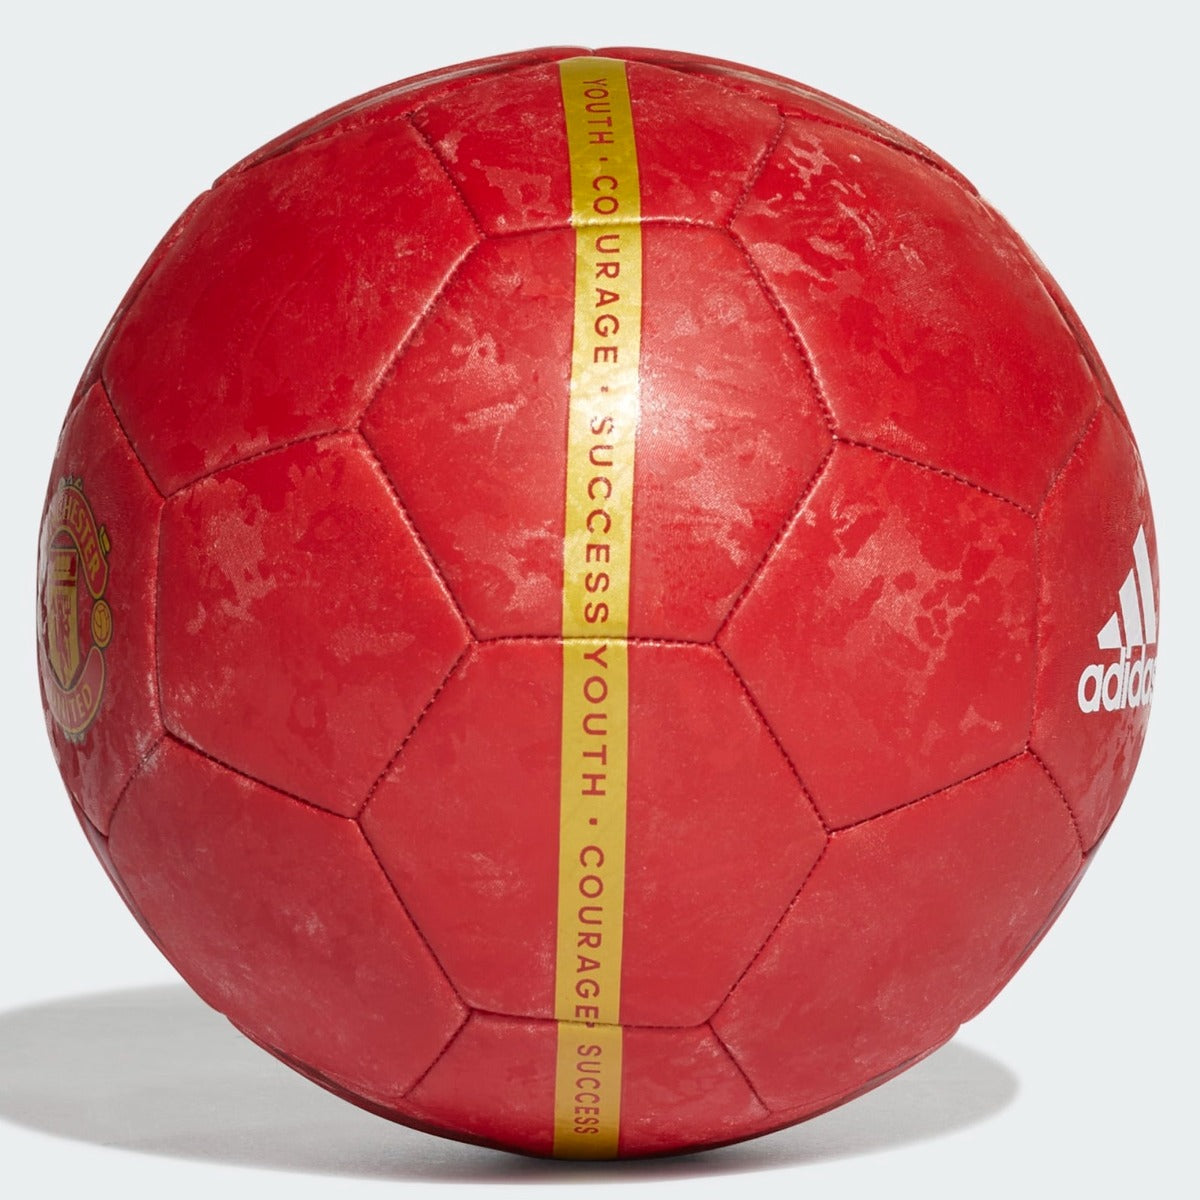 Adidas 2021-22 Manchester United Home Club Ball - Red-Gold (Back)